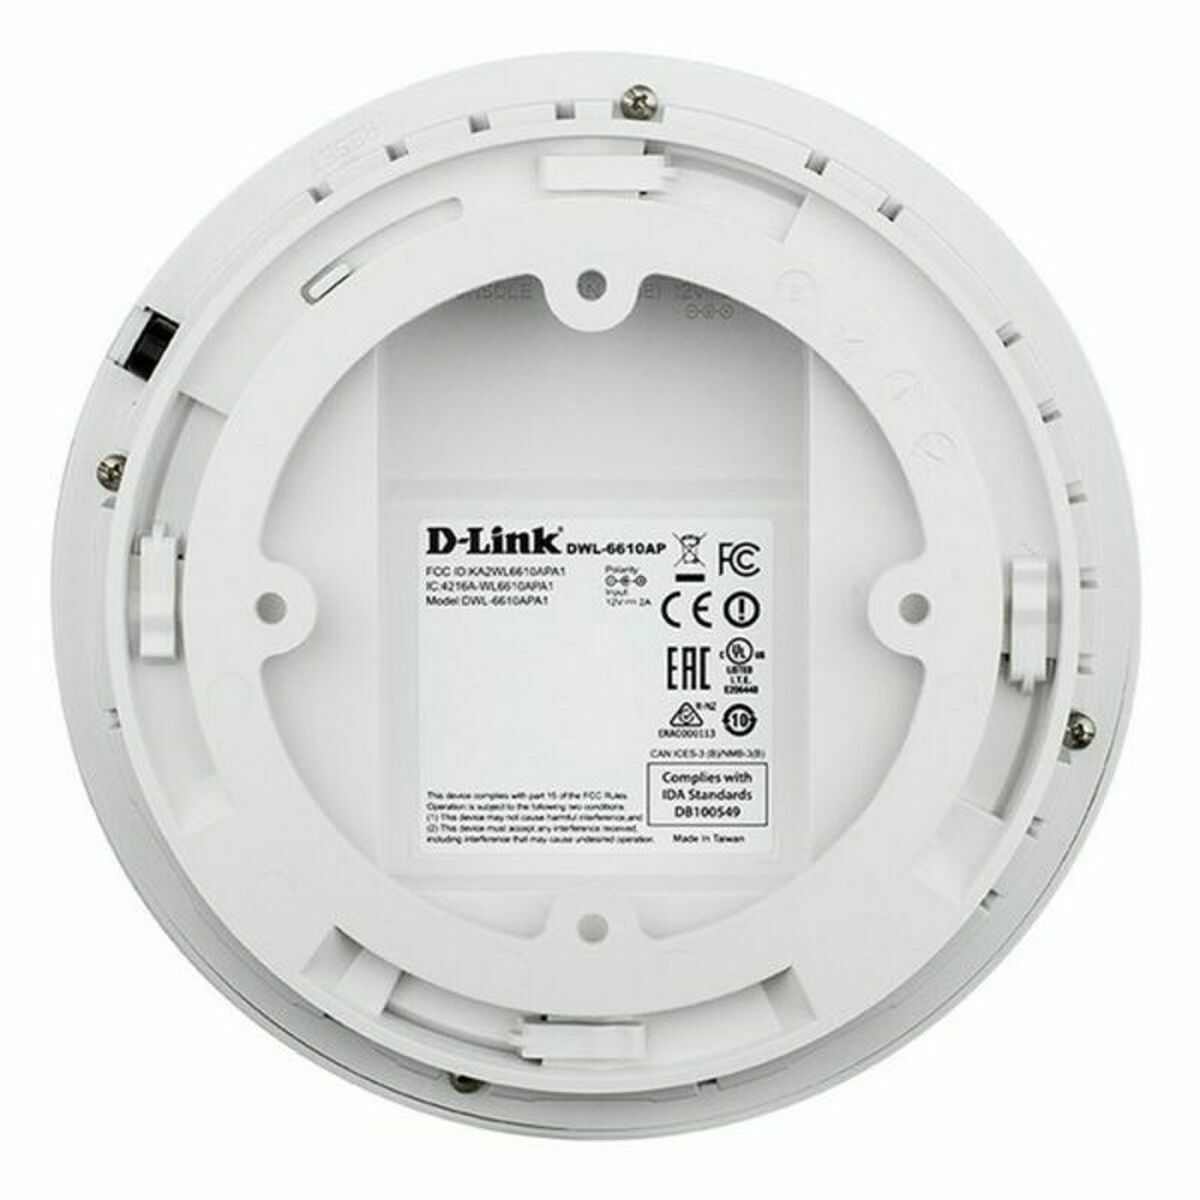 Access point D-Link DWL-6610AP White Black, D-Link, Computing, Network devices, access-point-d-link-dwl-6610ap-white-black, Brand_D-Link, category-reference-2609, category-reference-2803, category-reference-2820, category-reference-t-19685, category-reference-t-19914, category-reference-t-21369, Condition_NEW, networks/wiring, Price_200 - 300, Teleworking, RiotNook